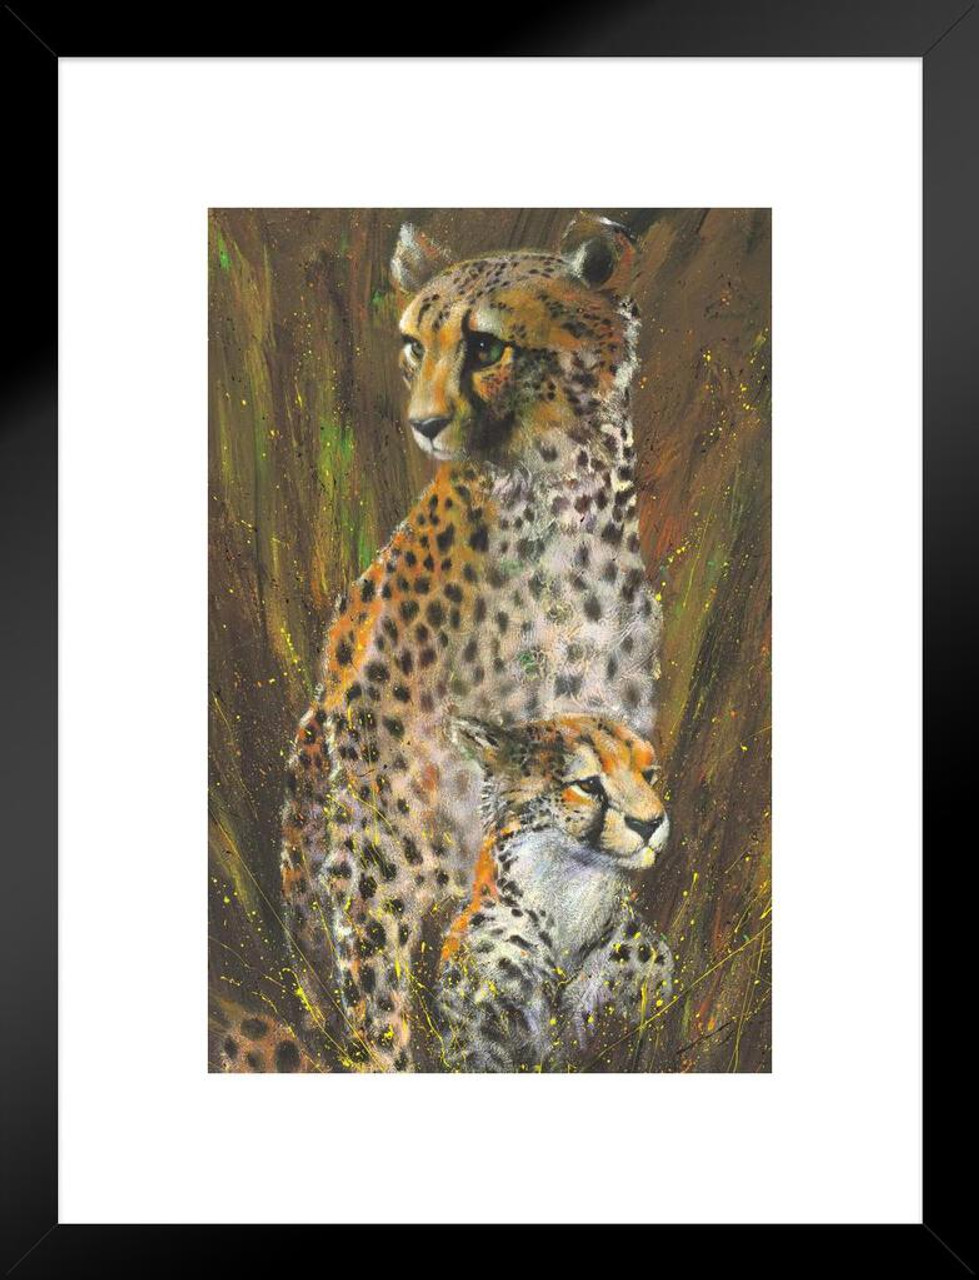 Mother Child Baby Cheetah Wild Animal Artistic Painting by Stephen Fishwick  Art Matted Framed Wall Decor Art Print 20x26 - Poster Foundry